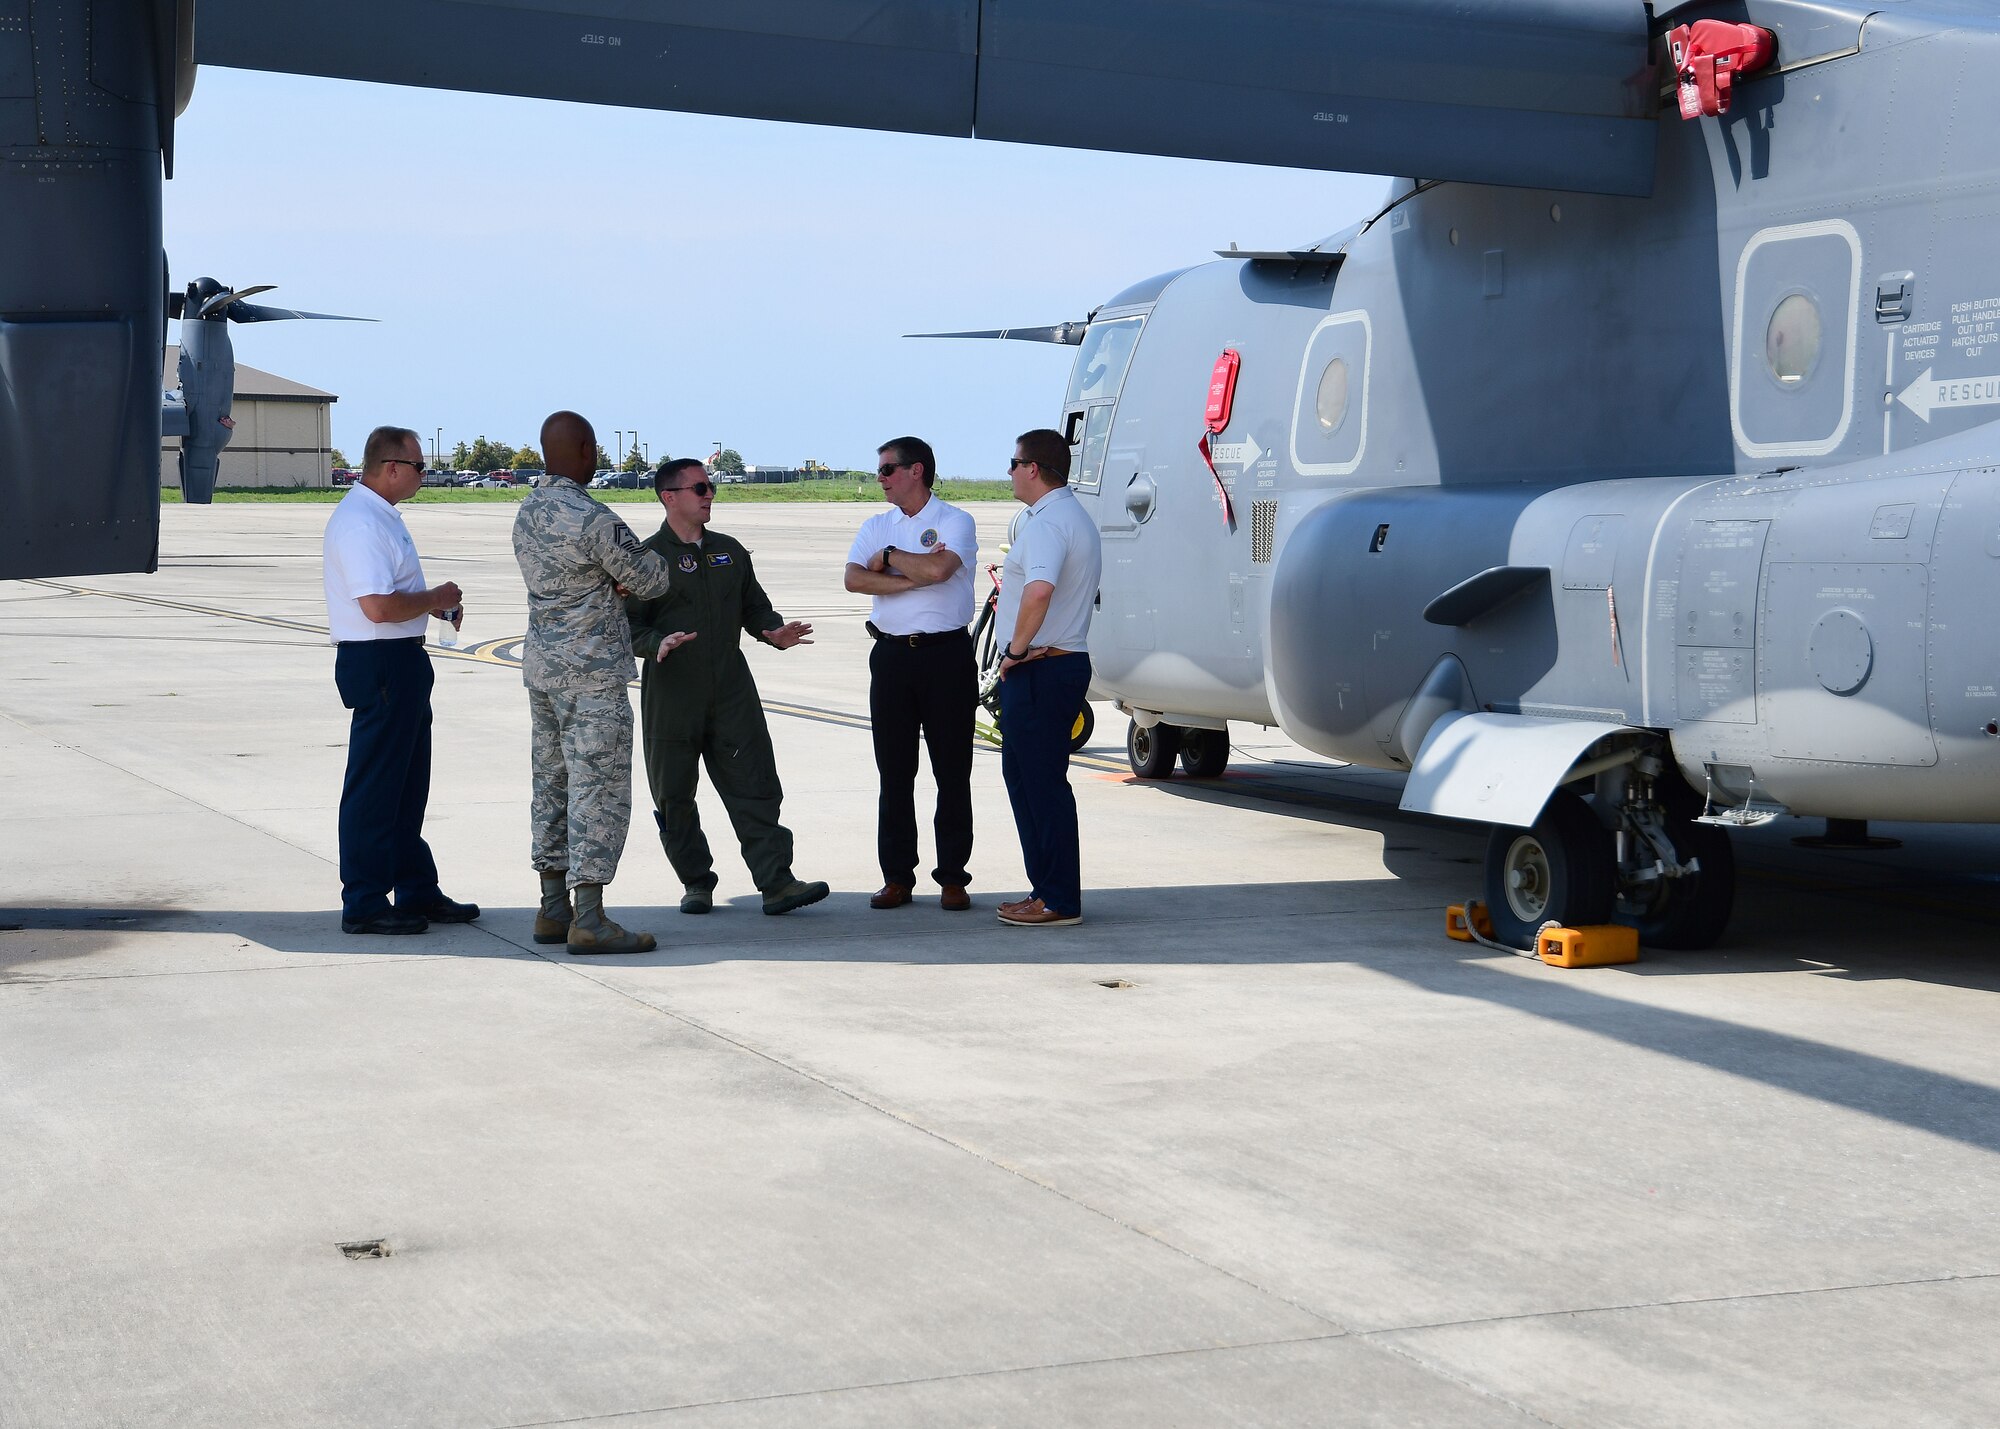 Lt. Col. Richard Konopczynski, 700th Airlift Squadron, right, and Senior Master Sgt. Thomas Metcalf, 94th Security Forces Squadron, talk with a group of civic leaders during a tour of the flightline at Hurlburt Field, Florida, Aug. 14, 2019.